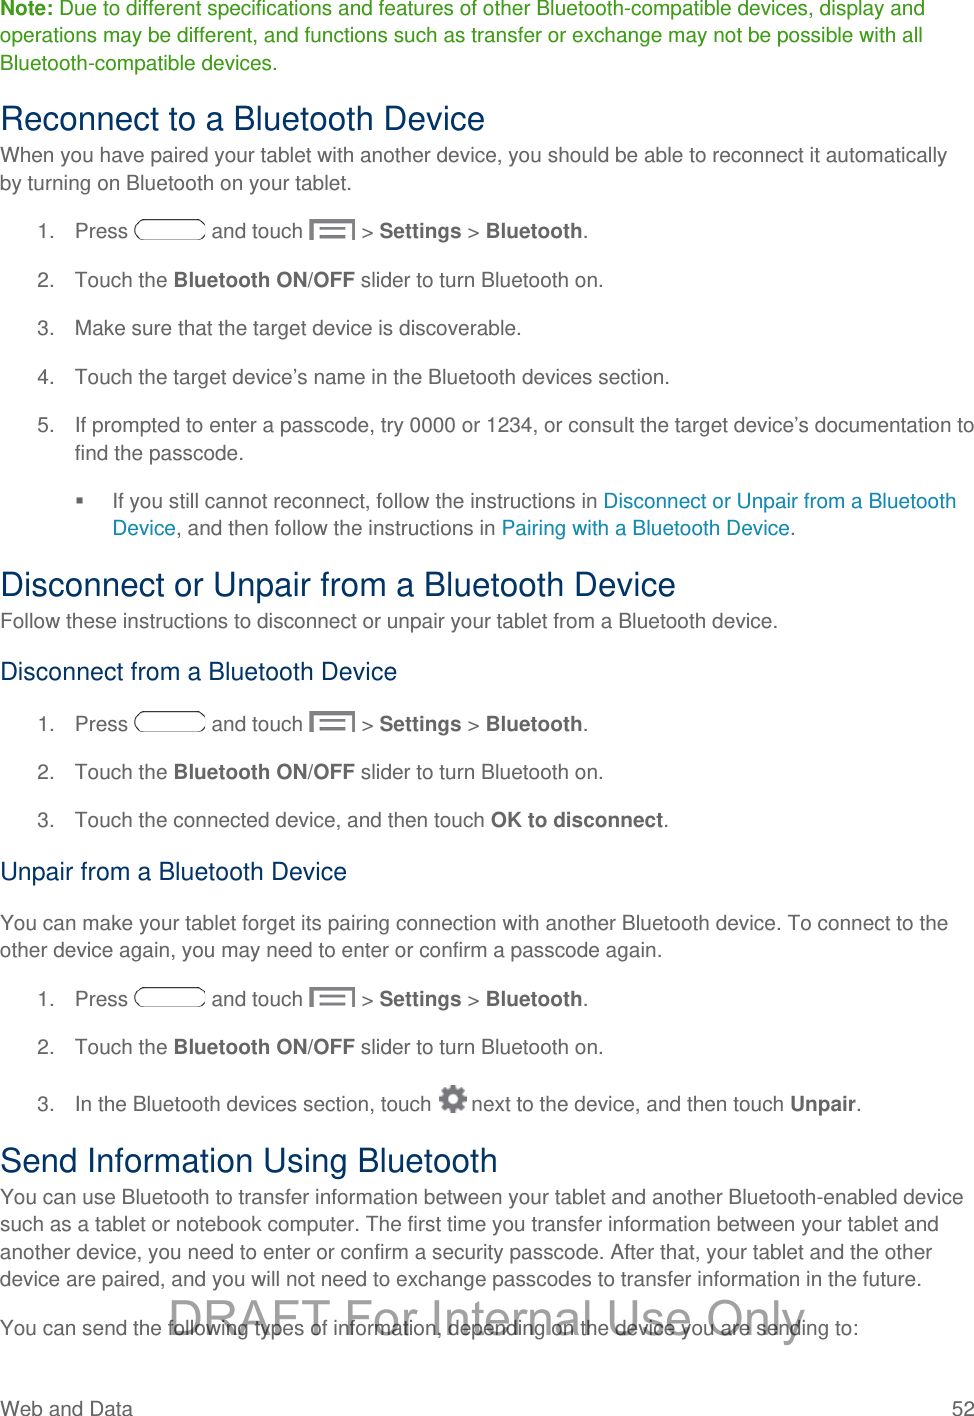 Note: Due to different specifications and features of other Bluetooth-compatible devices, display and operations may be different, and functions such as transfer or exchange may not be possible with all Bluetooth-compatible devices. Reconnect to a Bluetooth Device When you have paired your tablet with another device, you should be able to reconnect it automatically by turning on Bluetooth on your tablet. 1. Press   and touch   &gt; Settings &gt; Bluetooth. 2. Touch the Bluetooth ON/OFF slider to turn Bluetooth on. 3. Make sure that the target device is discoverable. 4. Touch the target device’s name in the Bluetooth devices section. 5. If prompted to enter a passcode, try 0000 or 1234, or consult the target device’s documentation to find the passcode.  If you still cannot reconnect, follow the instructions in Disconnect or Unpair from a Bluetooth Device, and then follow the instructions in Pairing with a Bluetooth Device. Disconnect or Unpair from a Bluetooth Device Follow these instructions to disconnect or unpair your tablet from a Bluetooth device. Disconnect from a Bluetooth Device 1. Press   and touch   &gt; Settings &gt; Bluetooth. 2.  Touch the Bluetooth ON/OFF slider to turn Bluetooth on. 3. Touch the connected device, and then touch OK to disconnect. Unpair from a Bluetooth Device You can make your tablet forget its pairing connection with another Bluetooth device. To connect to the other device again, you may need to enter or confirm a passcode again. 1. Press   and touch   &gt; Settings &gt; Bluetooth. 2. Touch the Bluetooth ON/OFF slider to turn Bluetooth on. 3. In the Bluetooth devices section, touch   next to the device, and then touch Unpair. Send Information Using Bluetooth You can use Bluetooth to transfer information between your tablet and another Bluetooth-enabled device such as a tablet or notebook computer. The first time you transfer information between your tablet and another device, you need to enter or confirm a security passcode. After that, your tablet and the other device are paired, and you will not need to exchange passcodes to transfer information in the future. You can send the following types of information, depending on the device you are sending to: Web and Data 52   DRAFT For Internal Use Only